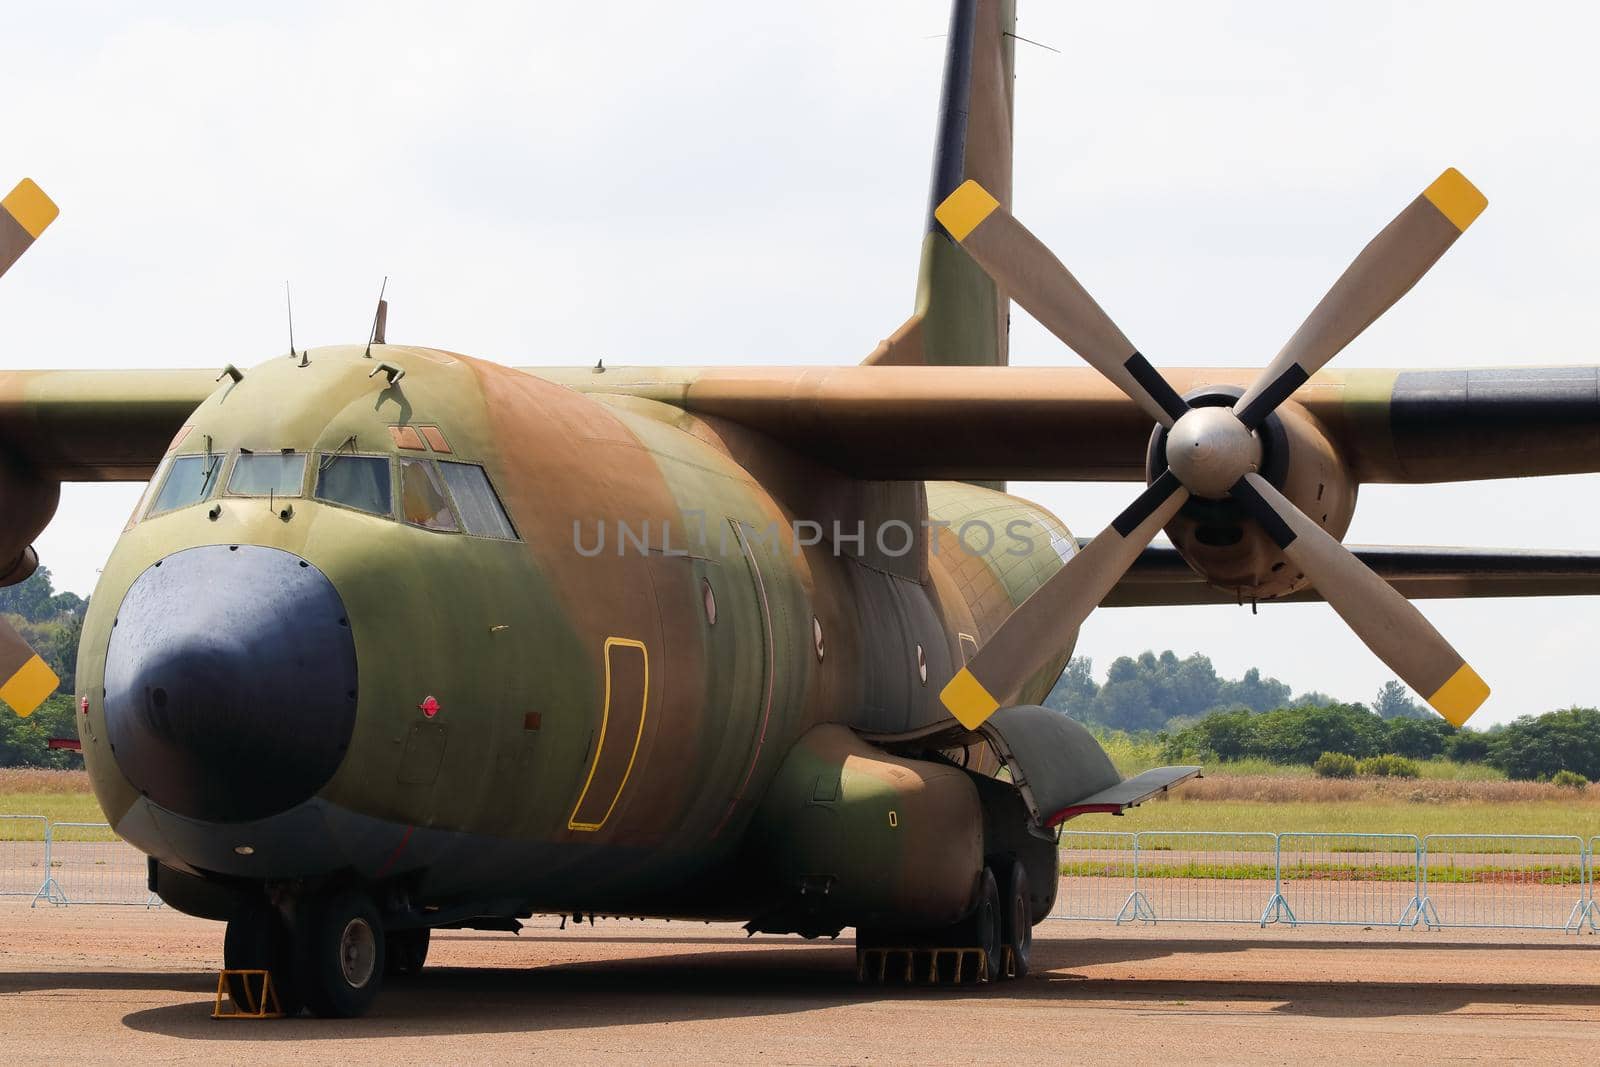 Military cargo transport aircraft parked at airport, South Africa